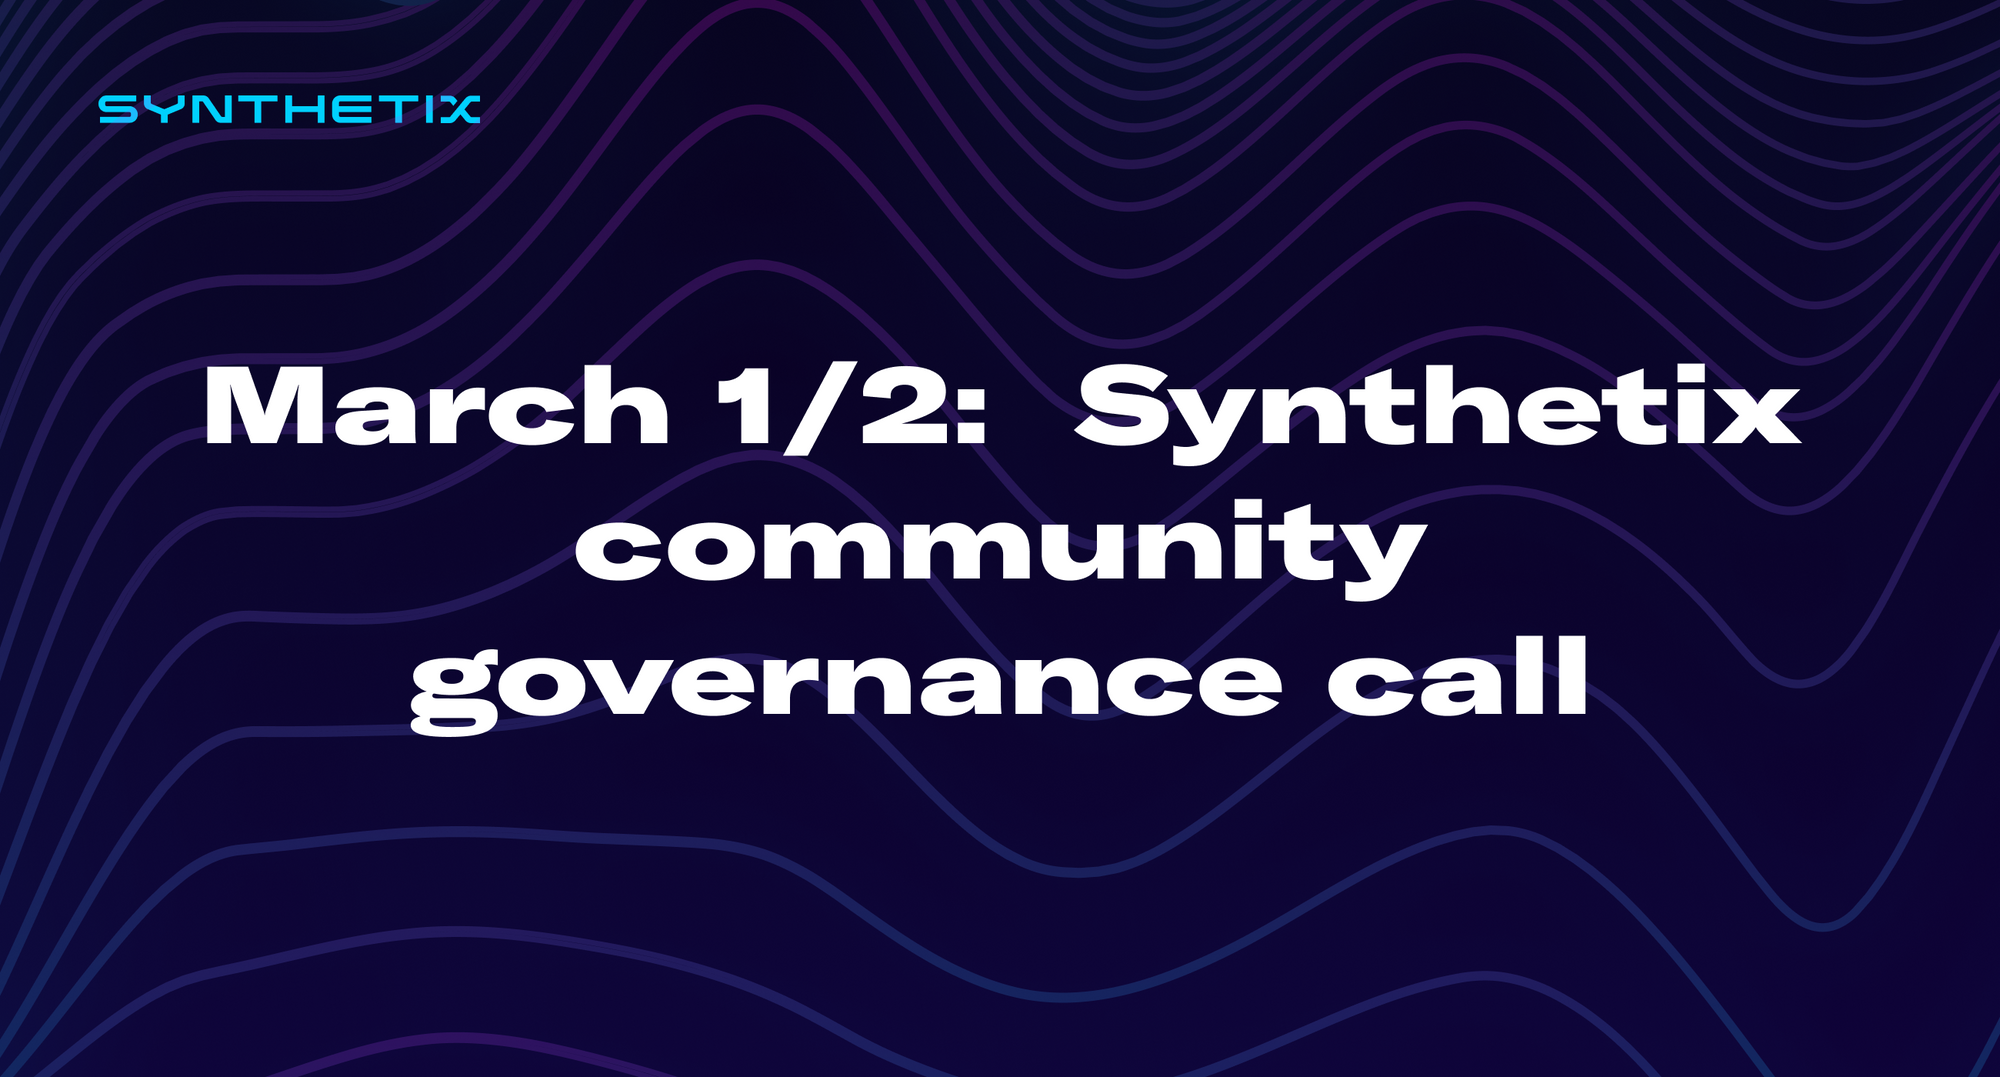 Come join us on March 1/2 for the next Synthetix community governance call!